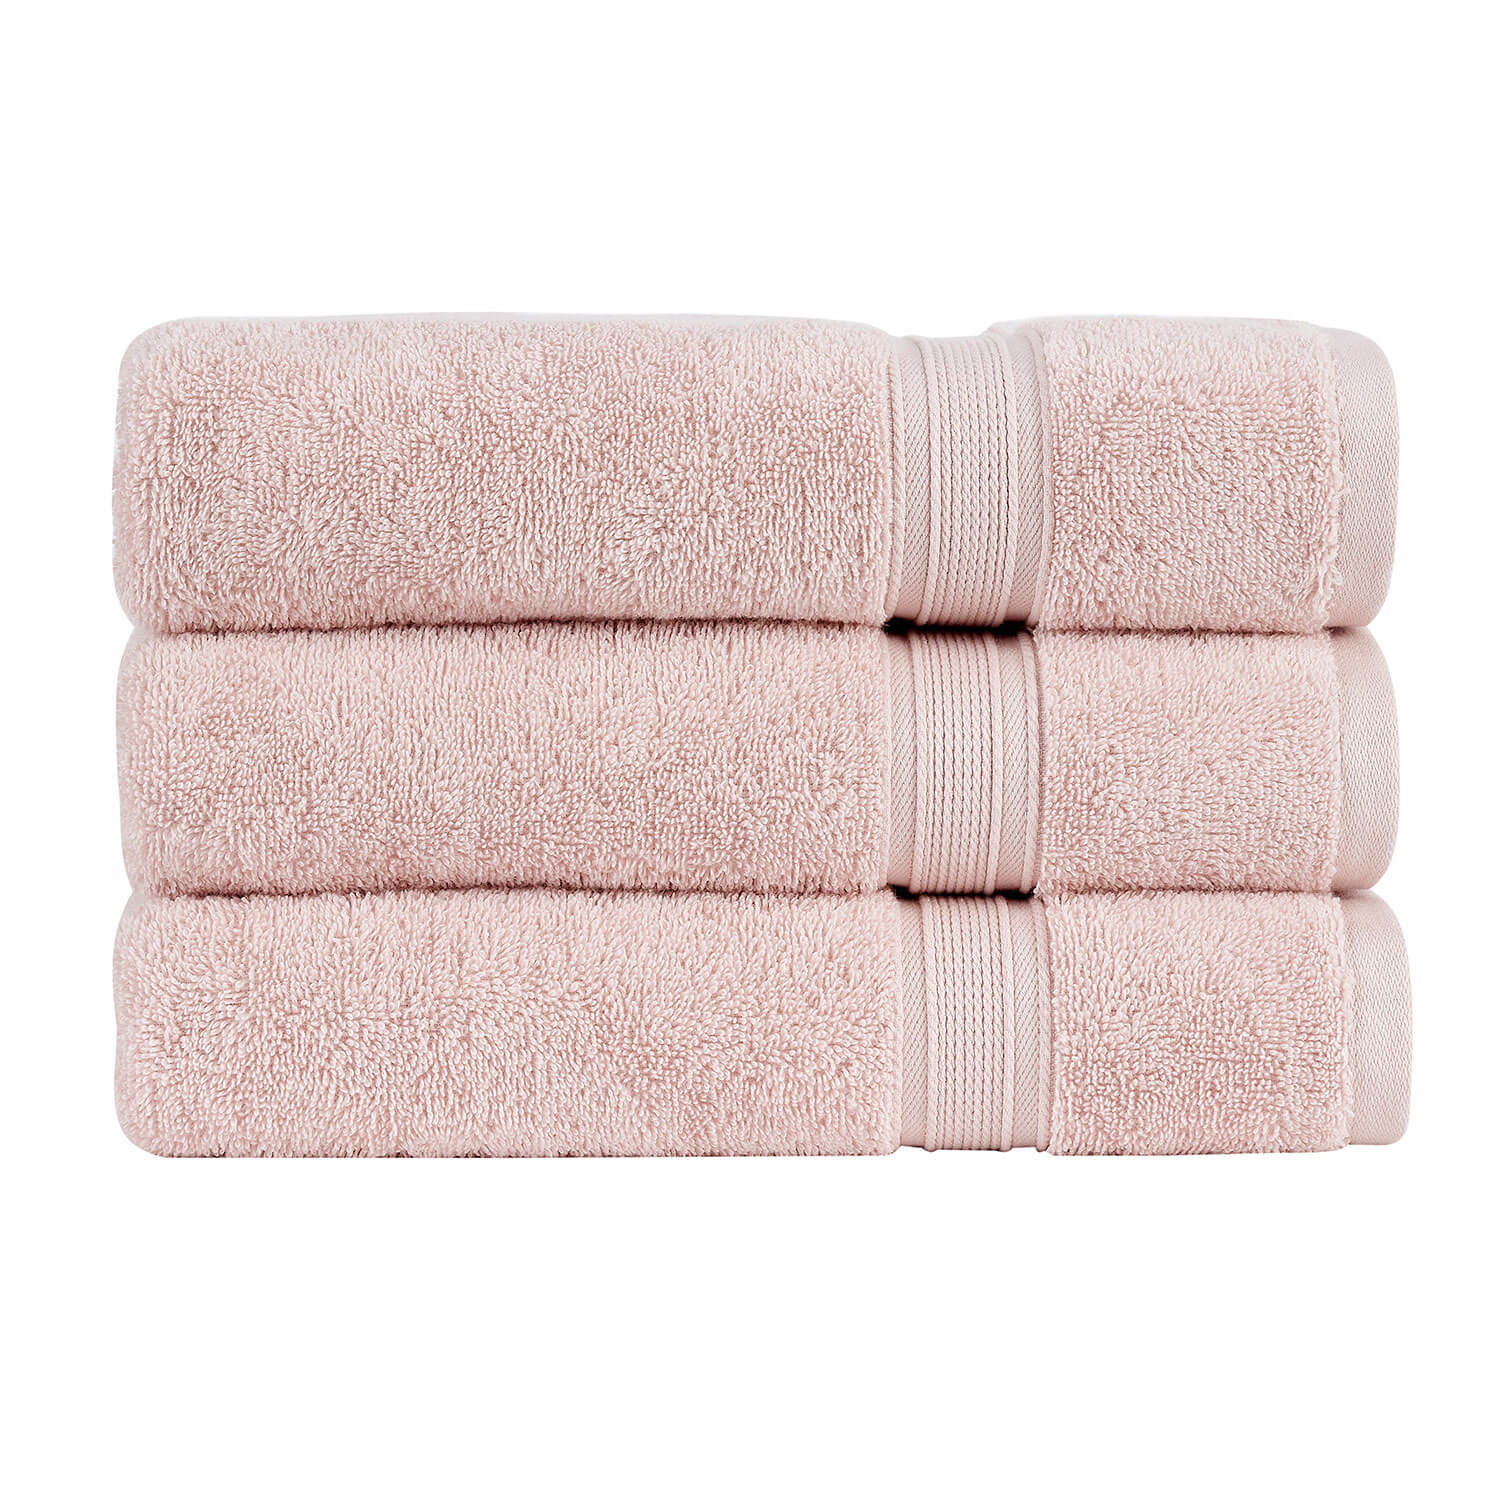 Christy Serene Hand Towel - Dusty Pink 1 Shaws Department Stores